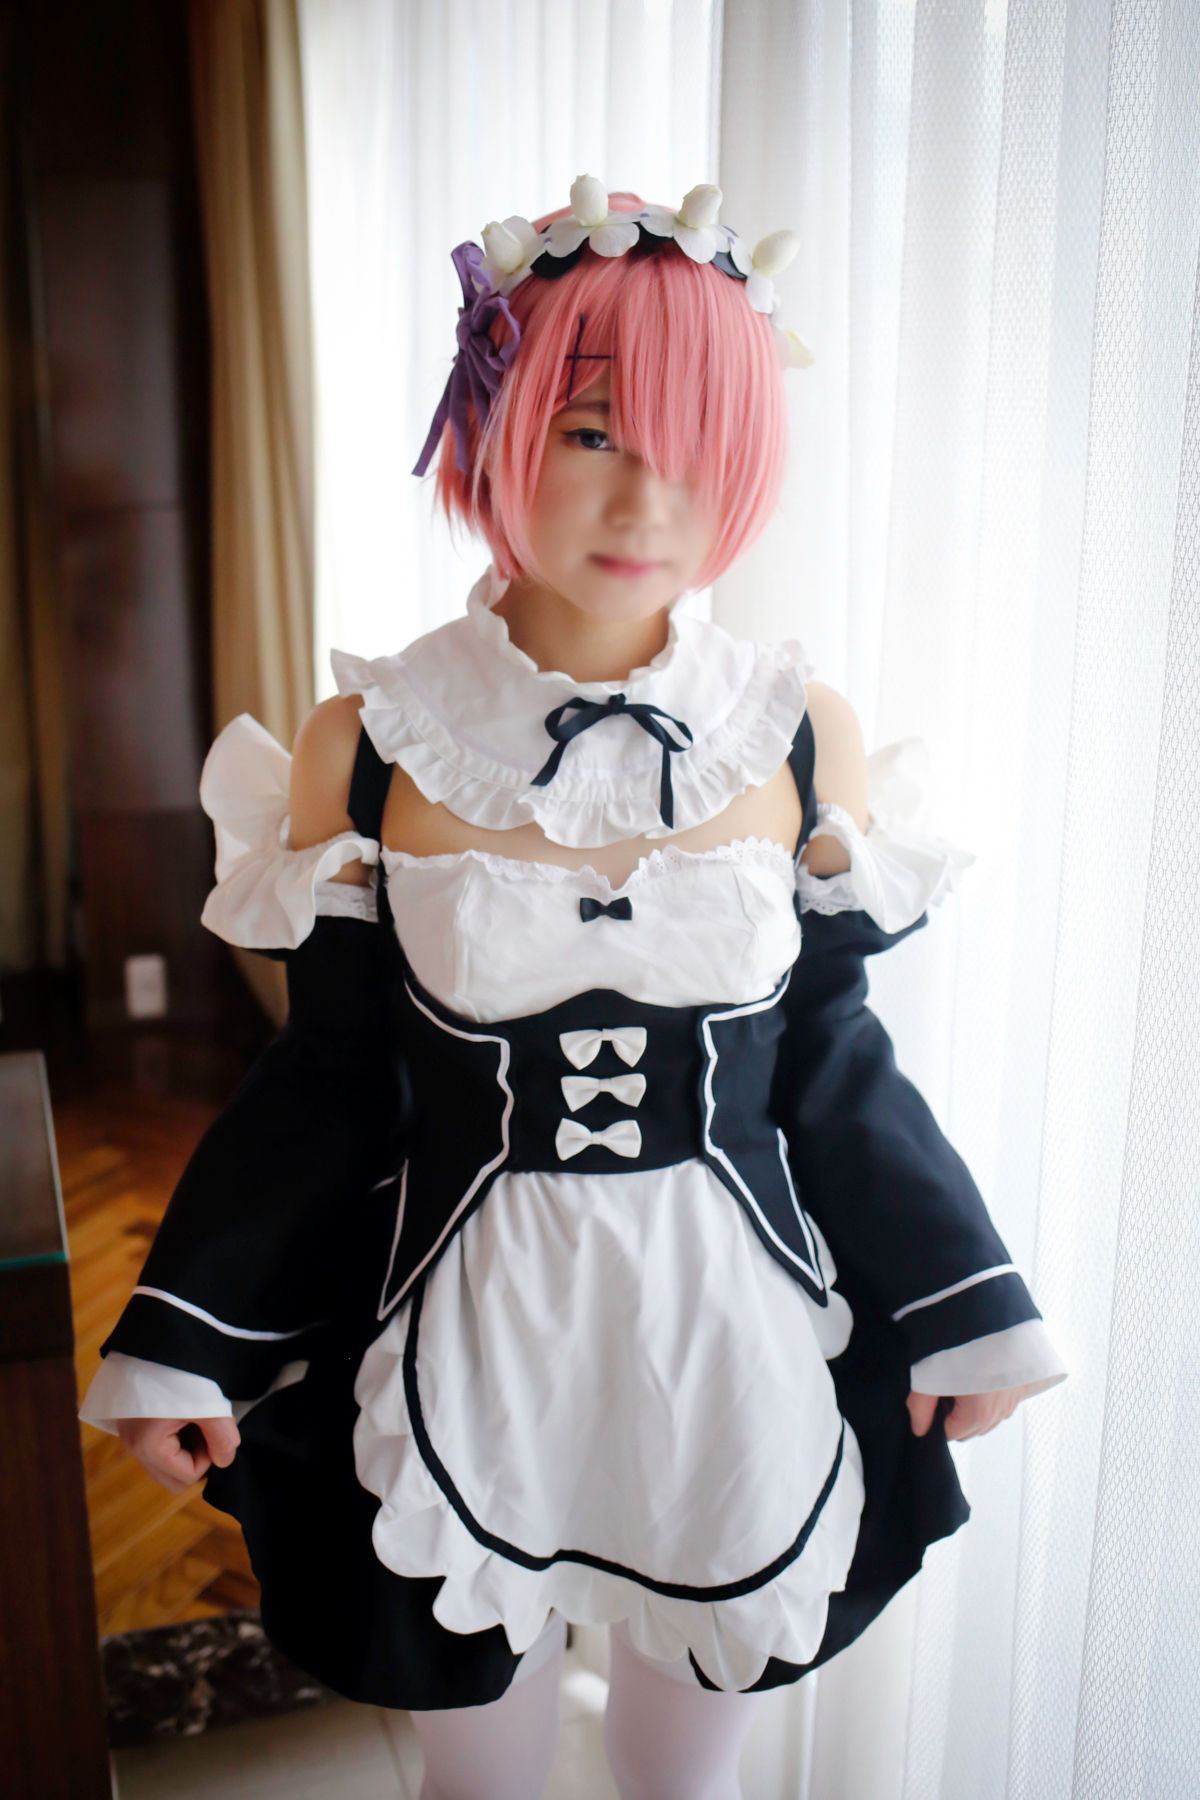 Naughty non REM ero Cosplay twin sister(3)